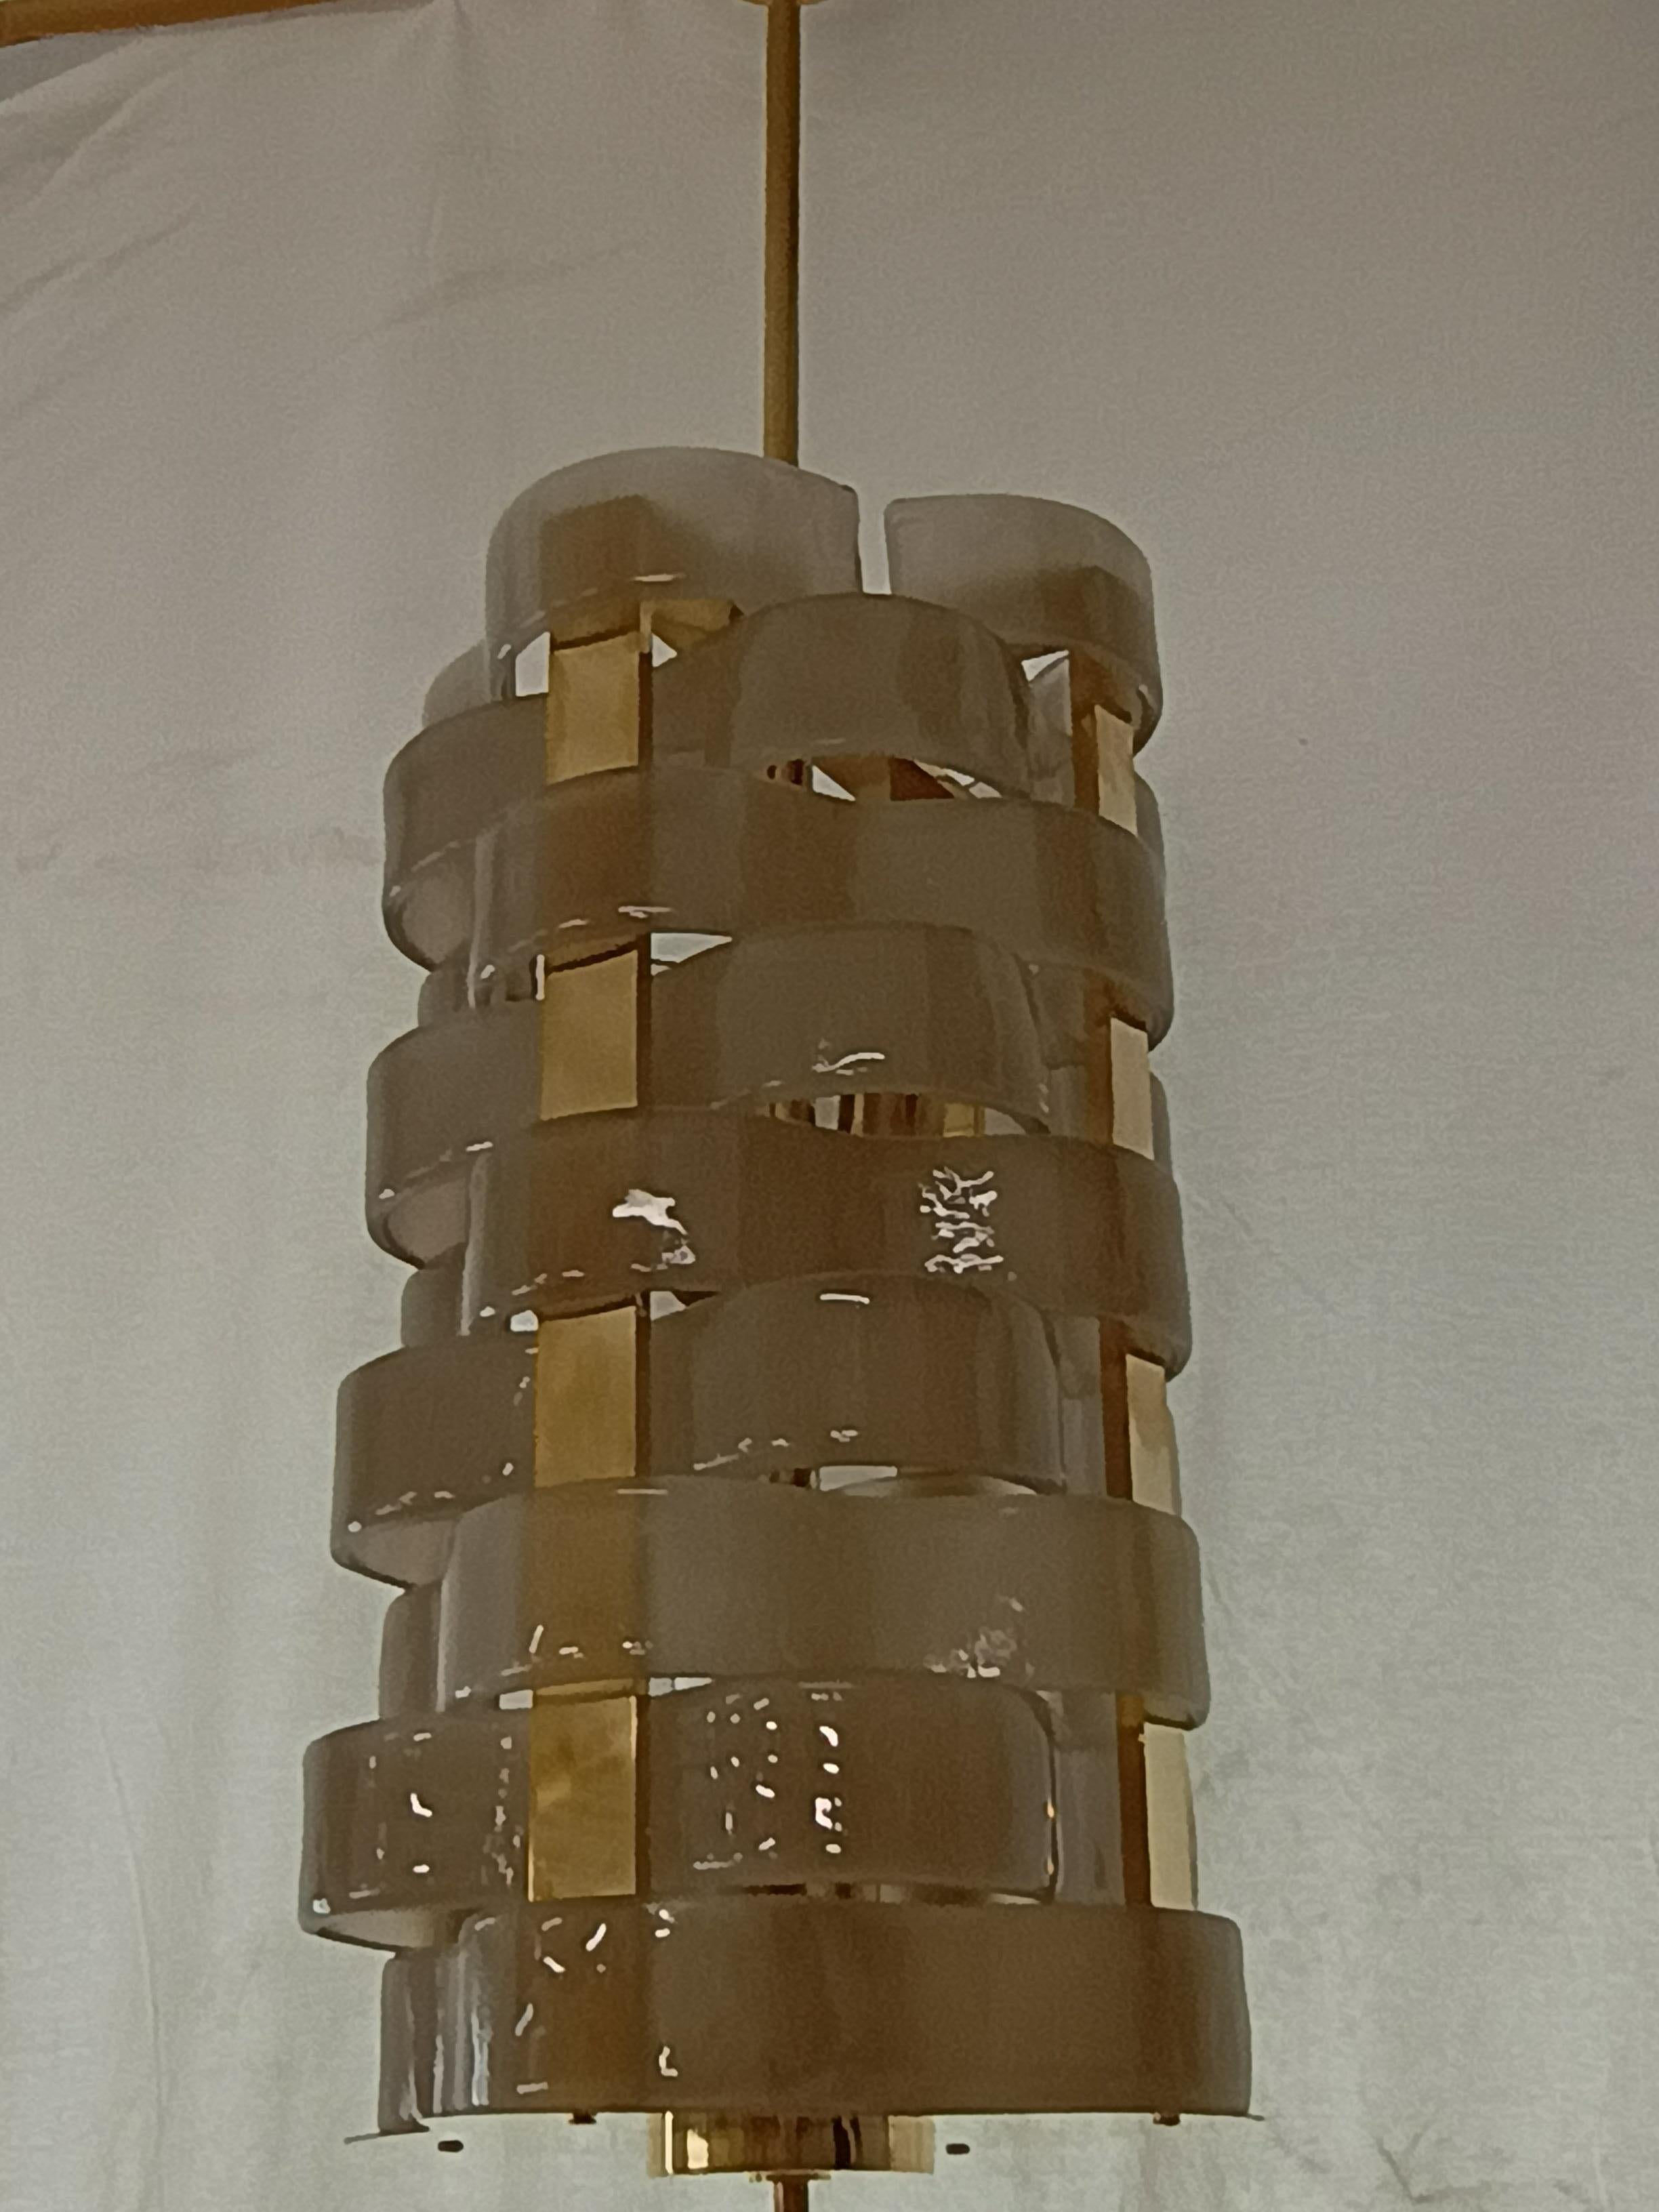 Design in woven Murano glass for this smoky colored chandelier, its style is elegant and linear.

The chandelier is in Murano glass, dove gray or smoked color. The shape of its glasses is very particular, positioned alternately one above the other,